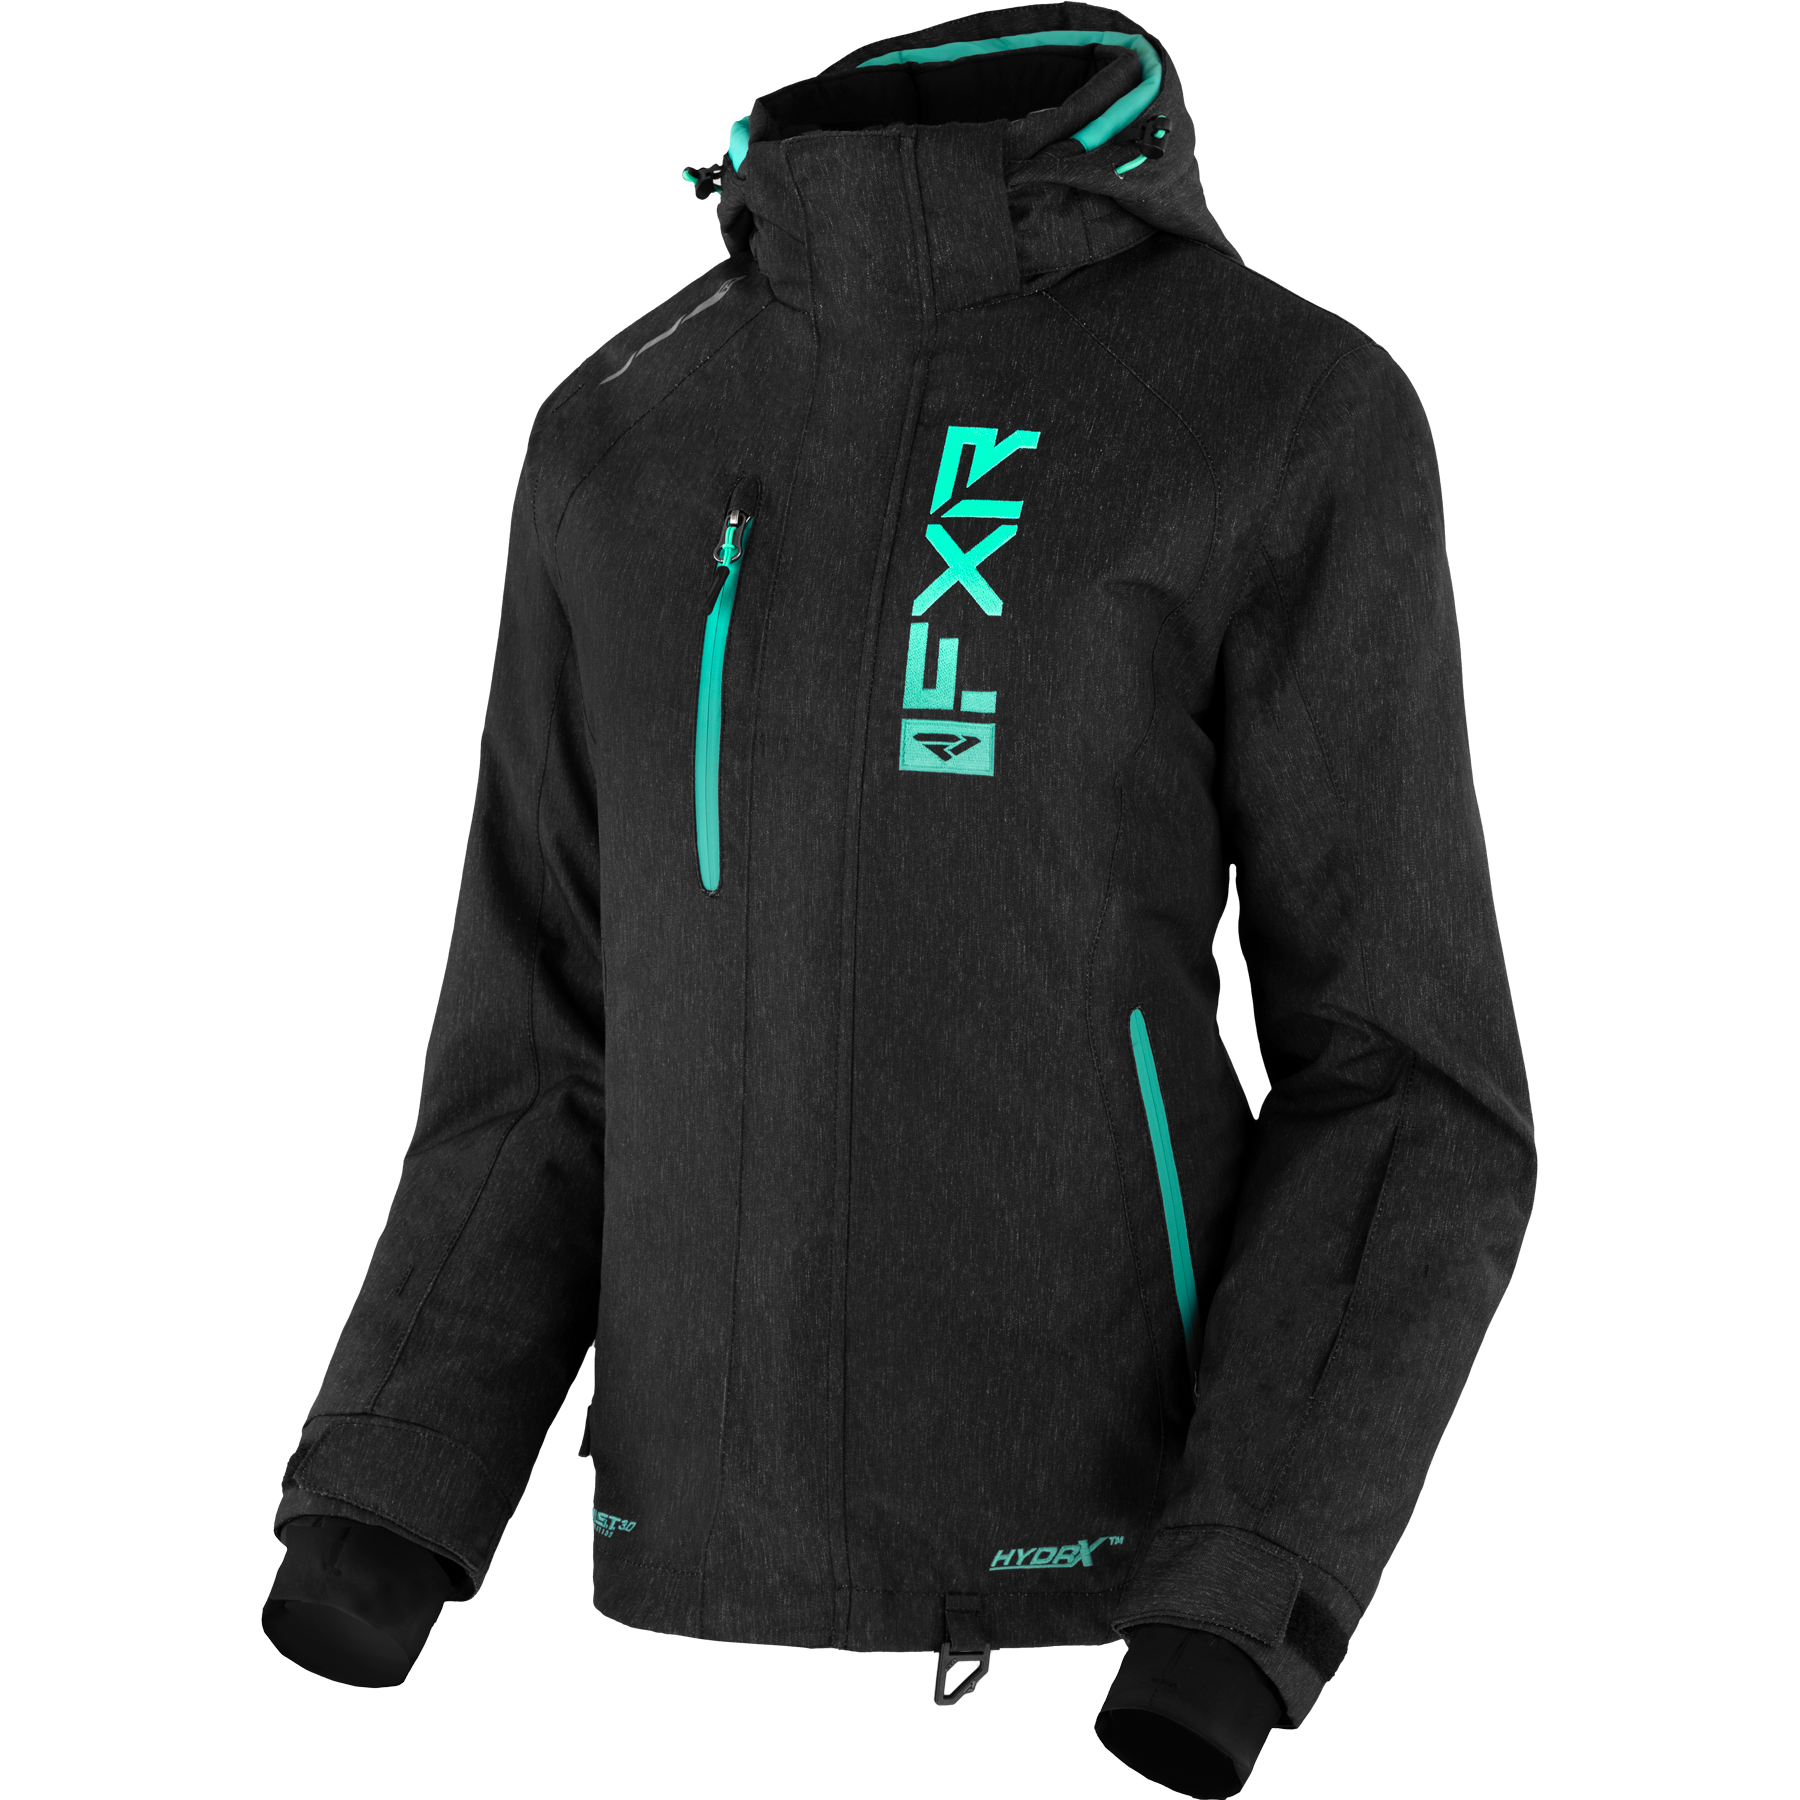 fxr racing insulated jackets for womens fresh fast